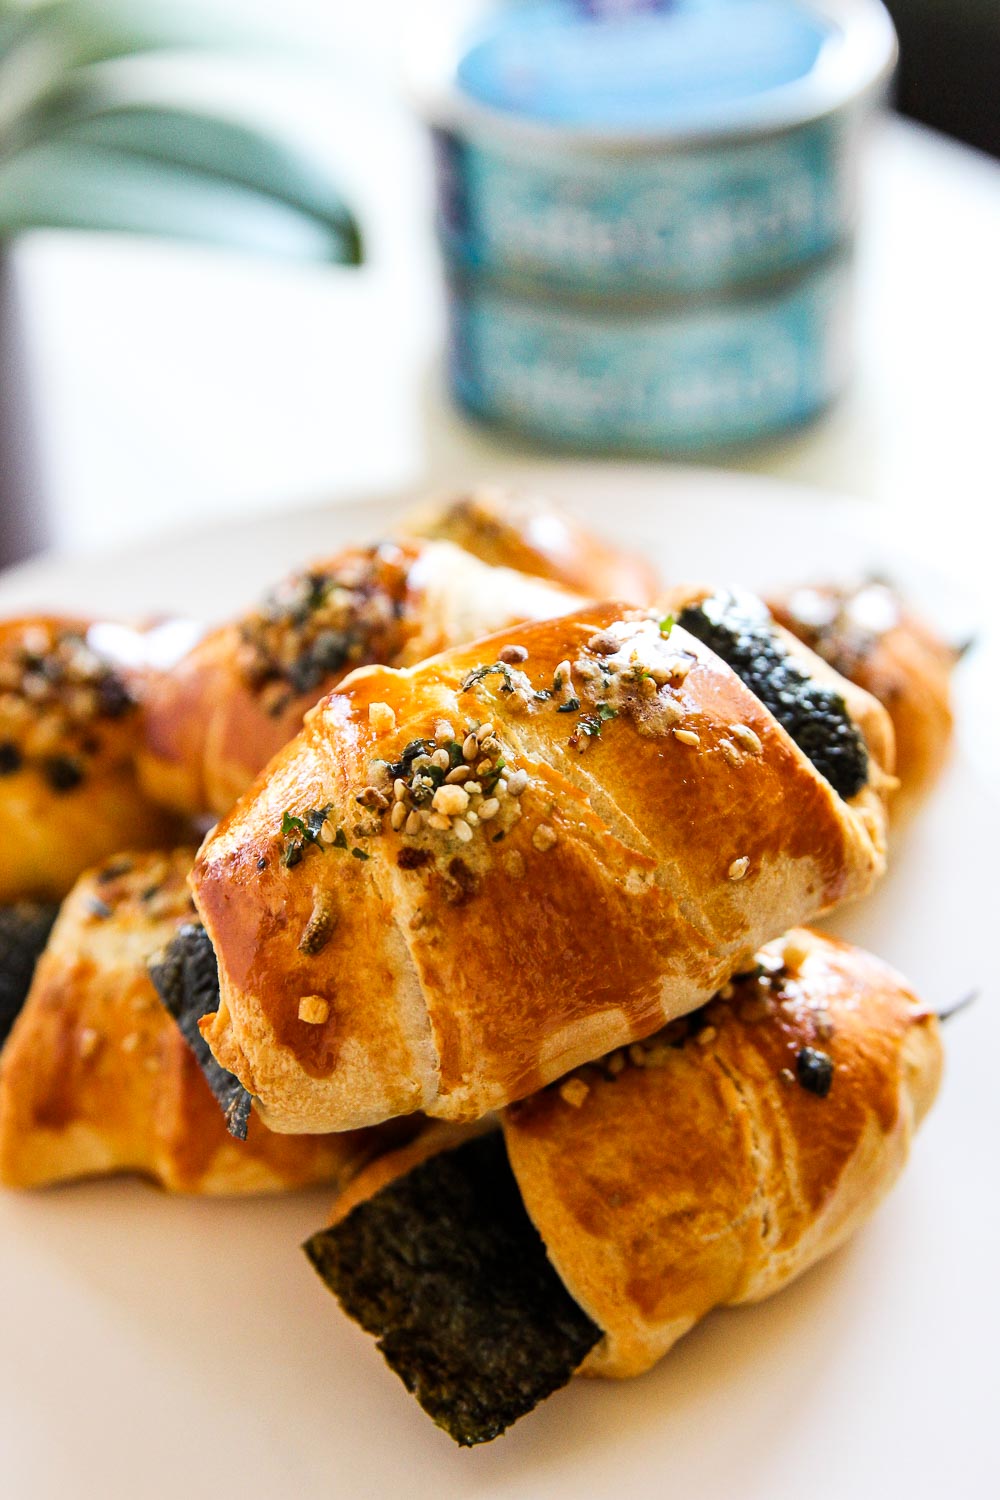 These delicious tuna croissants are the perfect treat for breakfast time or appetizer for your next party. With a little time and tuna, you can make this savory breakfast that will get your morning off to a fun start.